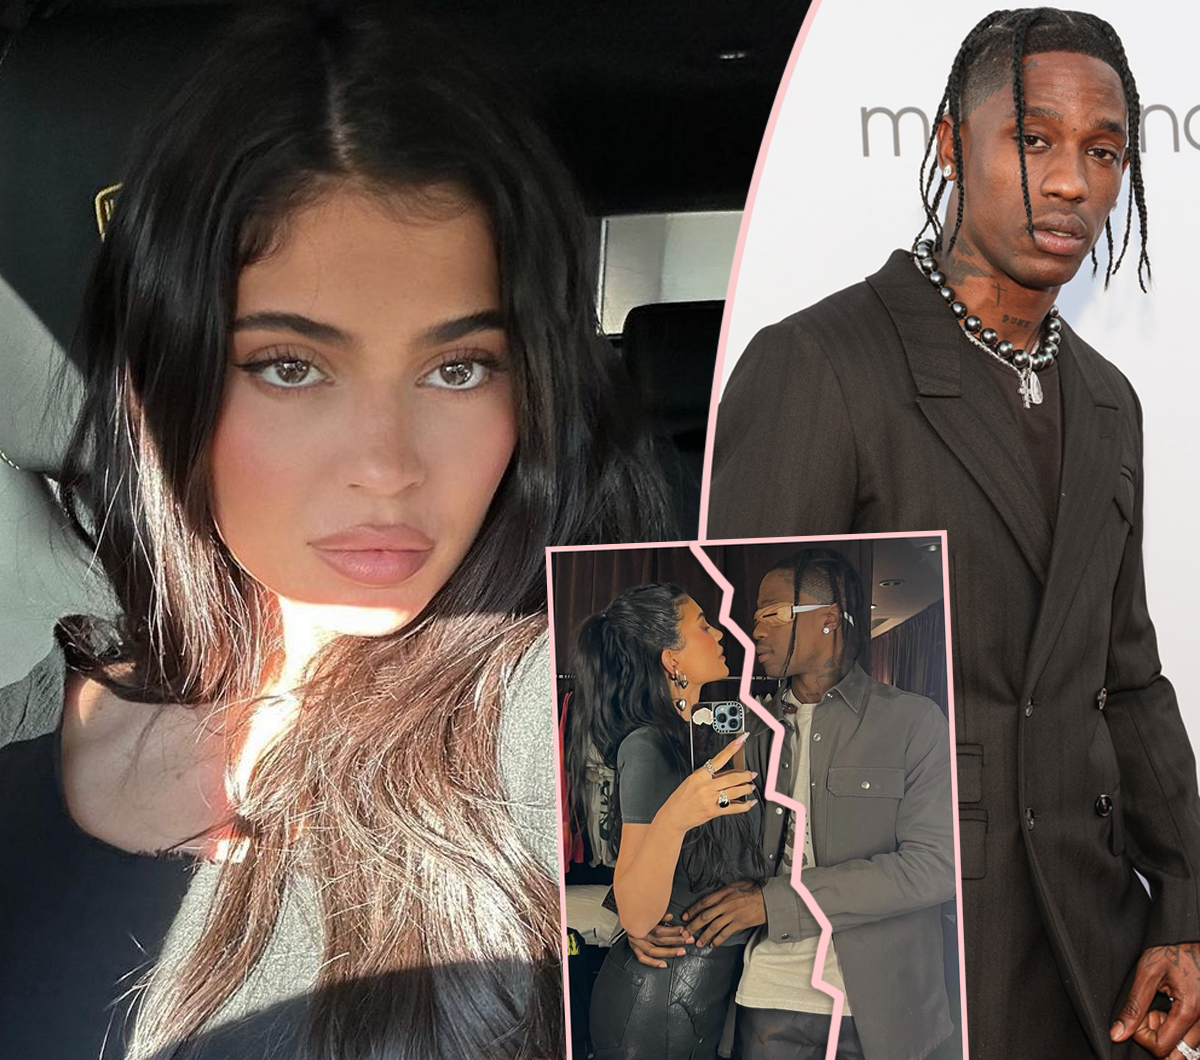 The Real Reason Kylie Jenner & Travis Scott ‘Aren’t Together Right Now